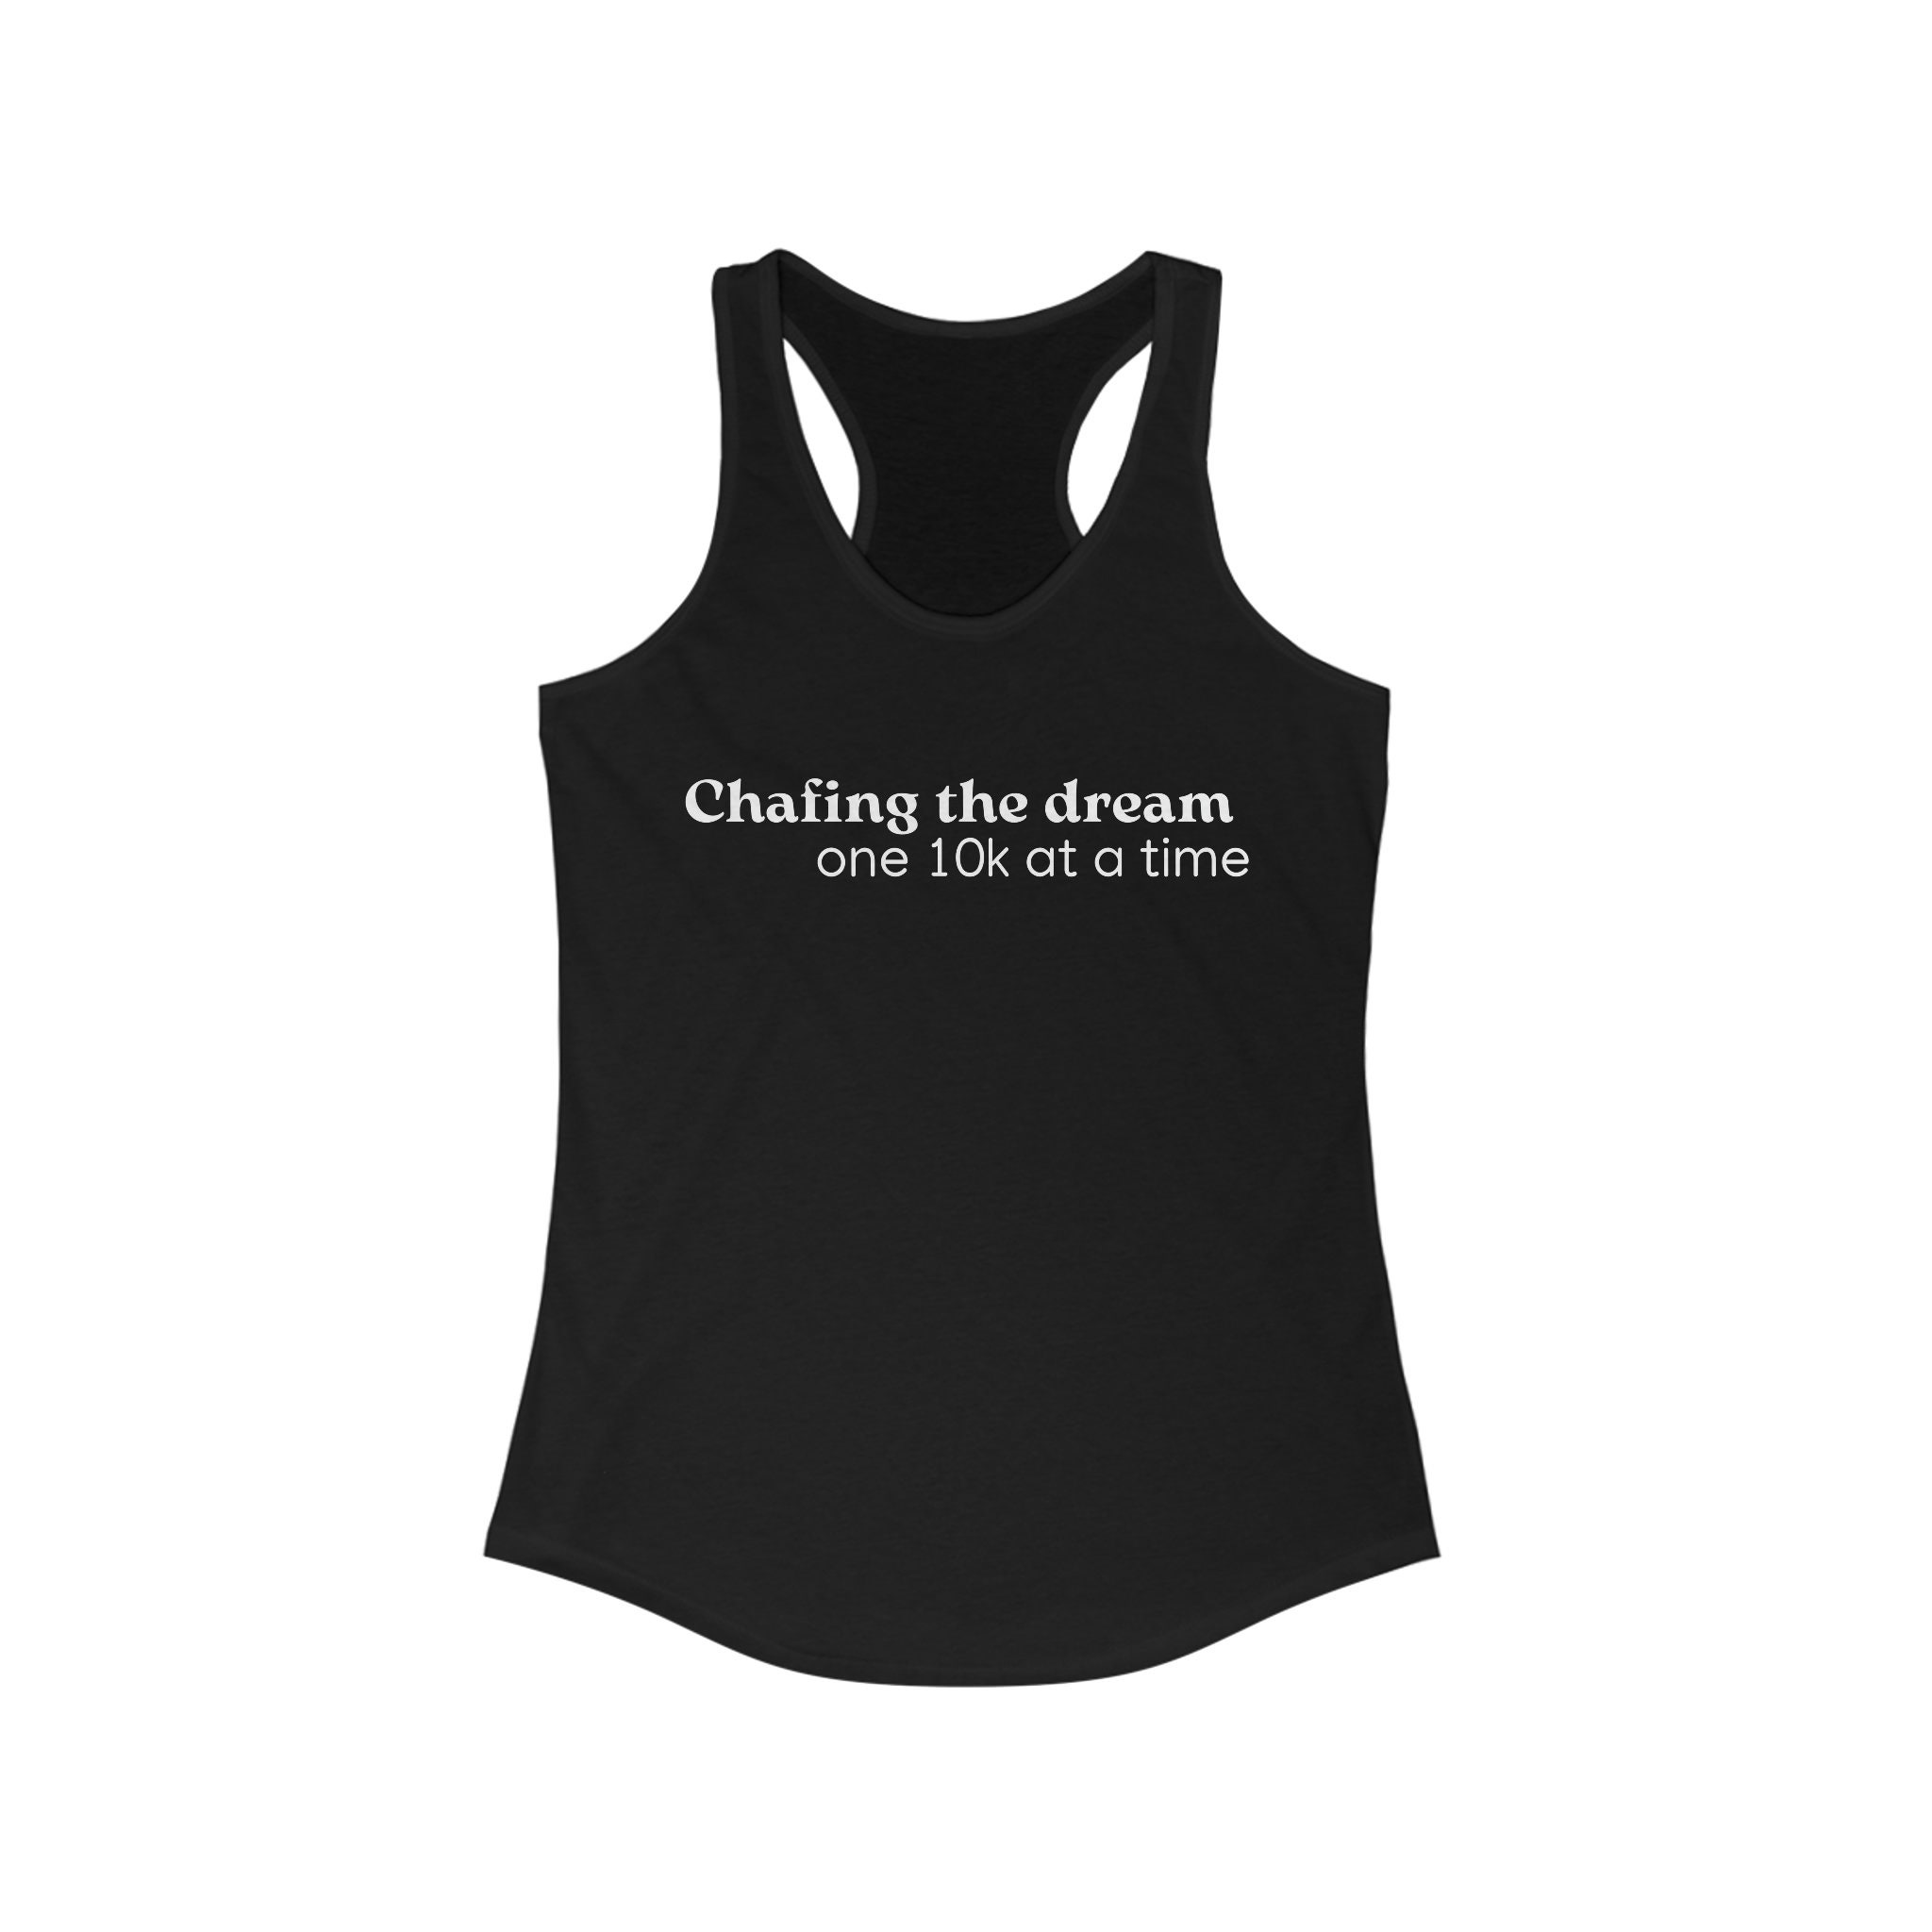 Team Chafing the Dream